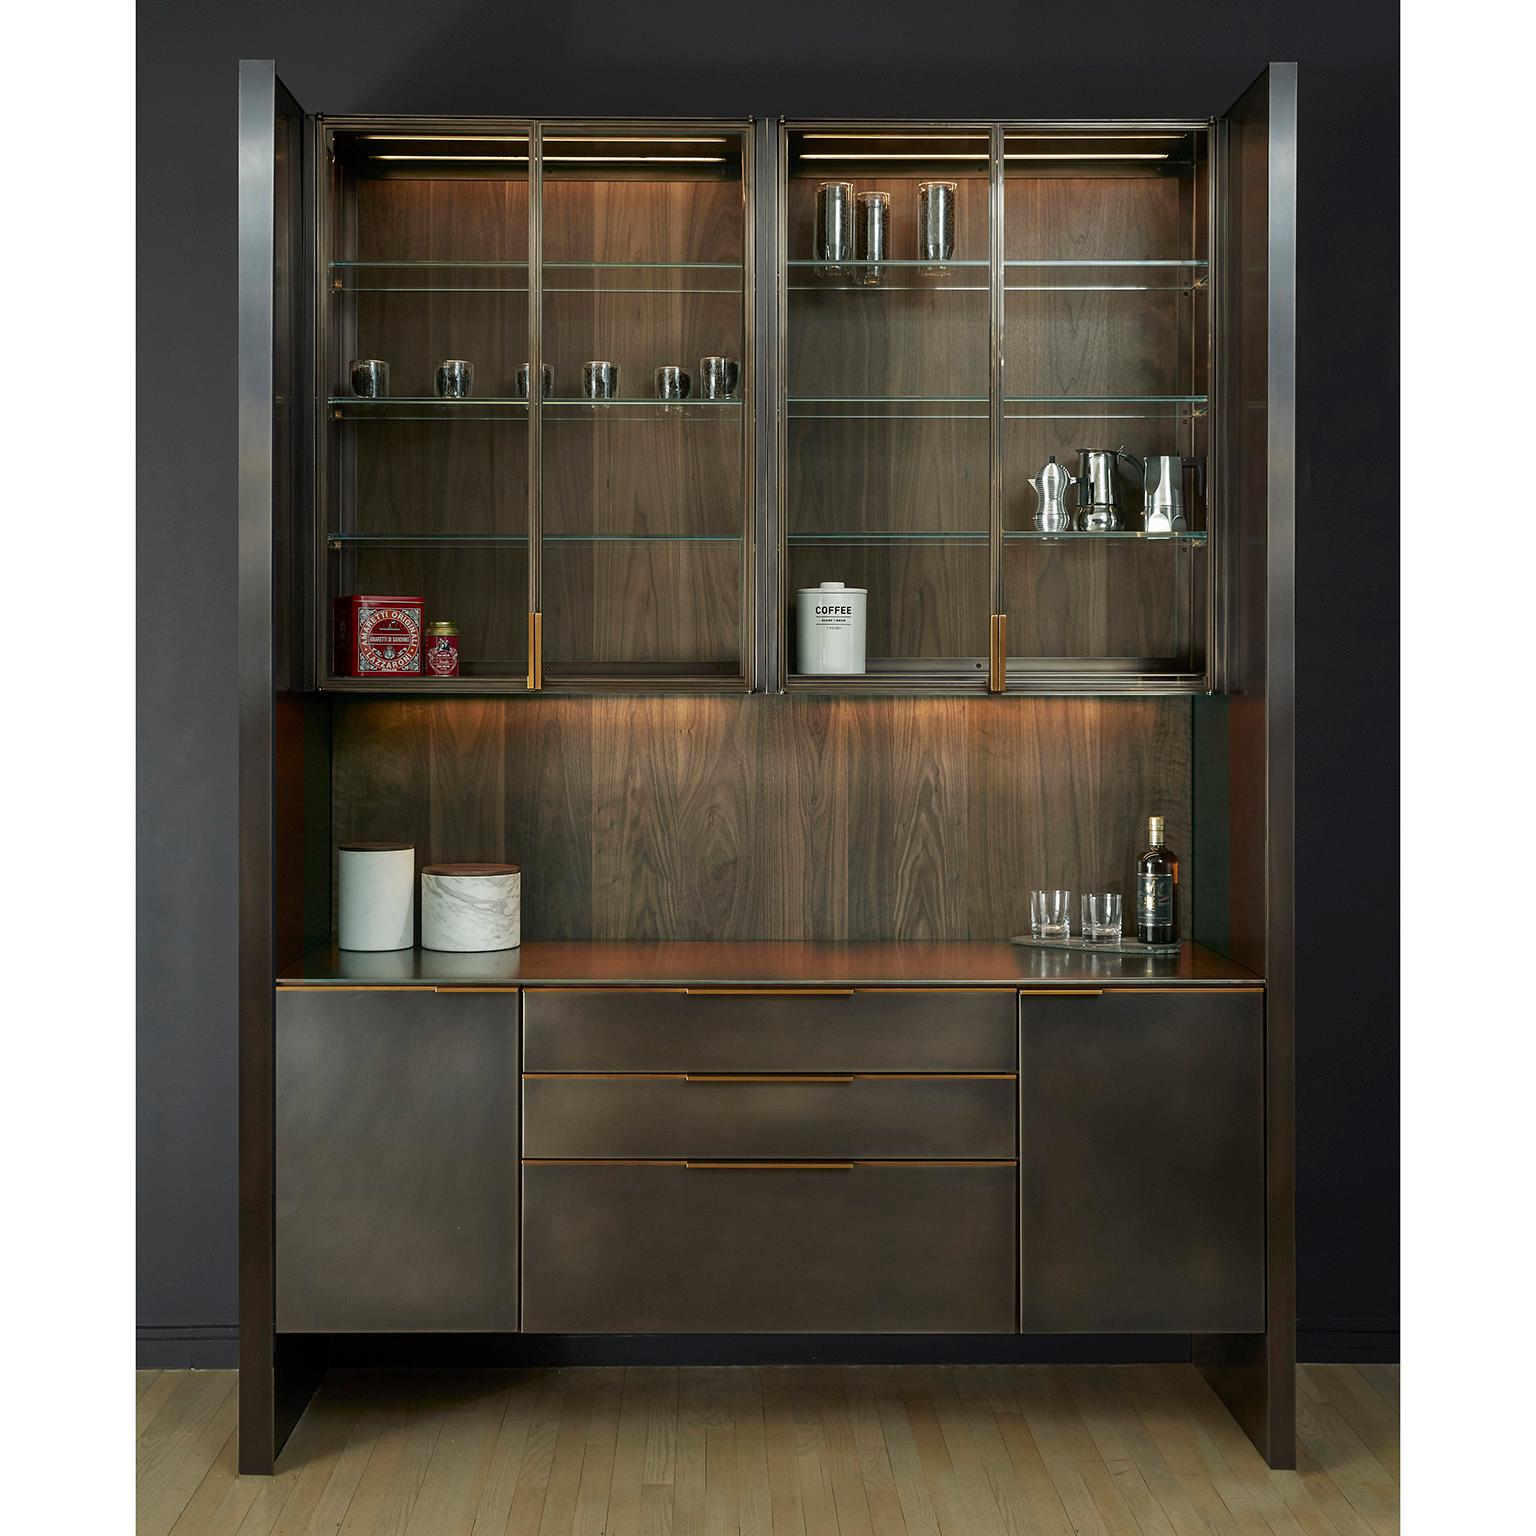 A bar system that blends individual functionality with Minimalist detailing. The interior cabinetry is fabricated from solid wood and handcut veneers offering the highest quality traditional woodworking techniques. The hand blackened stainless steel